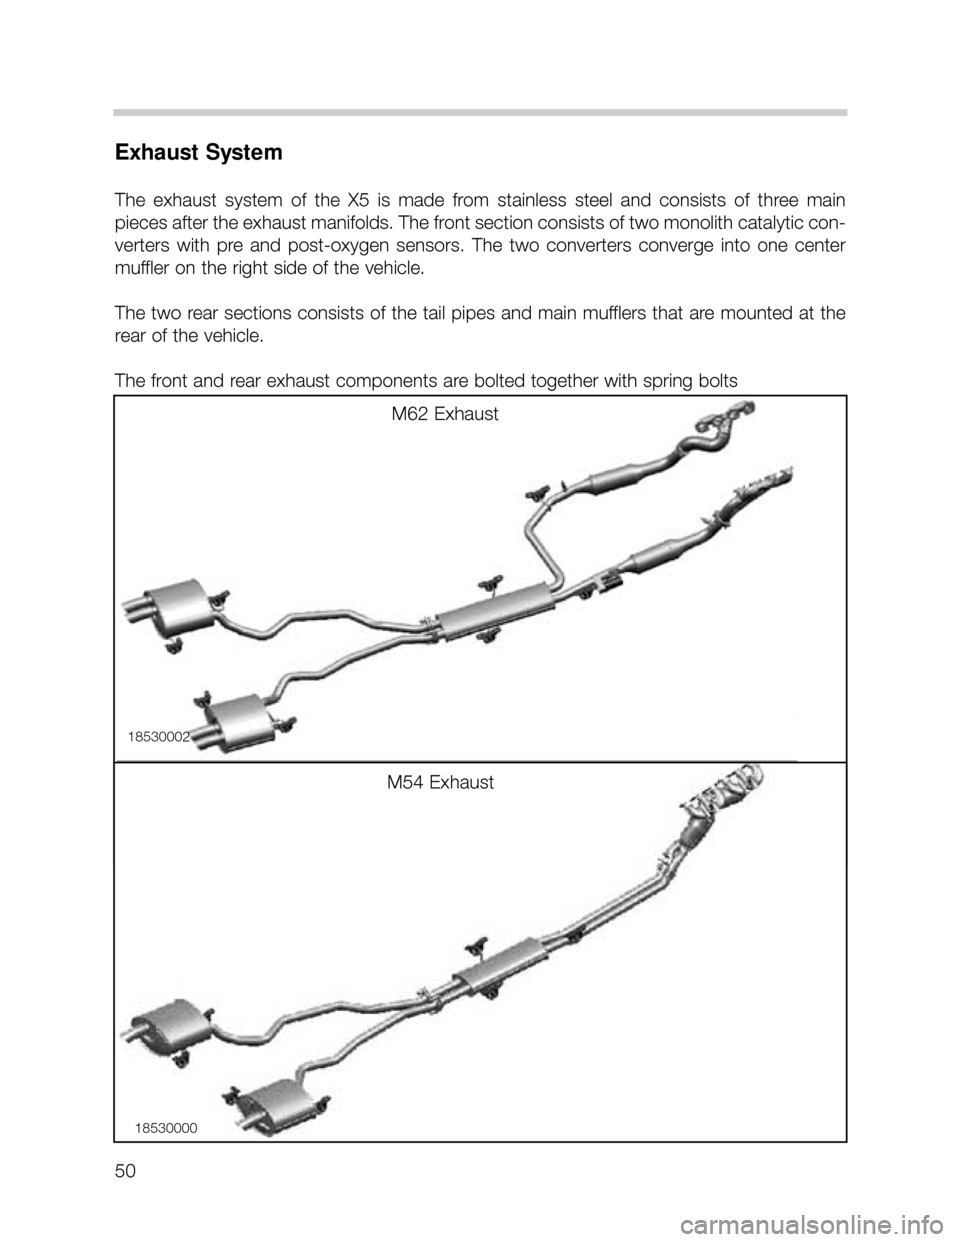 BMW X5 2001 E53 Workshop Manual 50
Exhaust System
The  exhaust  system  of  the  X5  is  made  from  stainless  steel  and  consists  of  three  main
pieces after the exhaust manifolds. The front section consists of two monolith cat